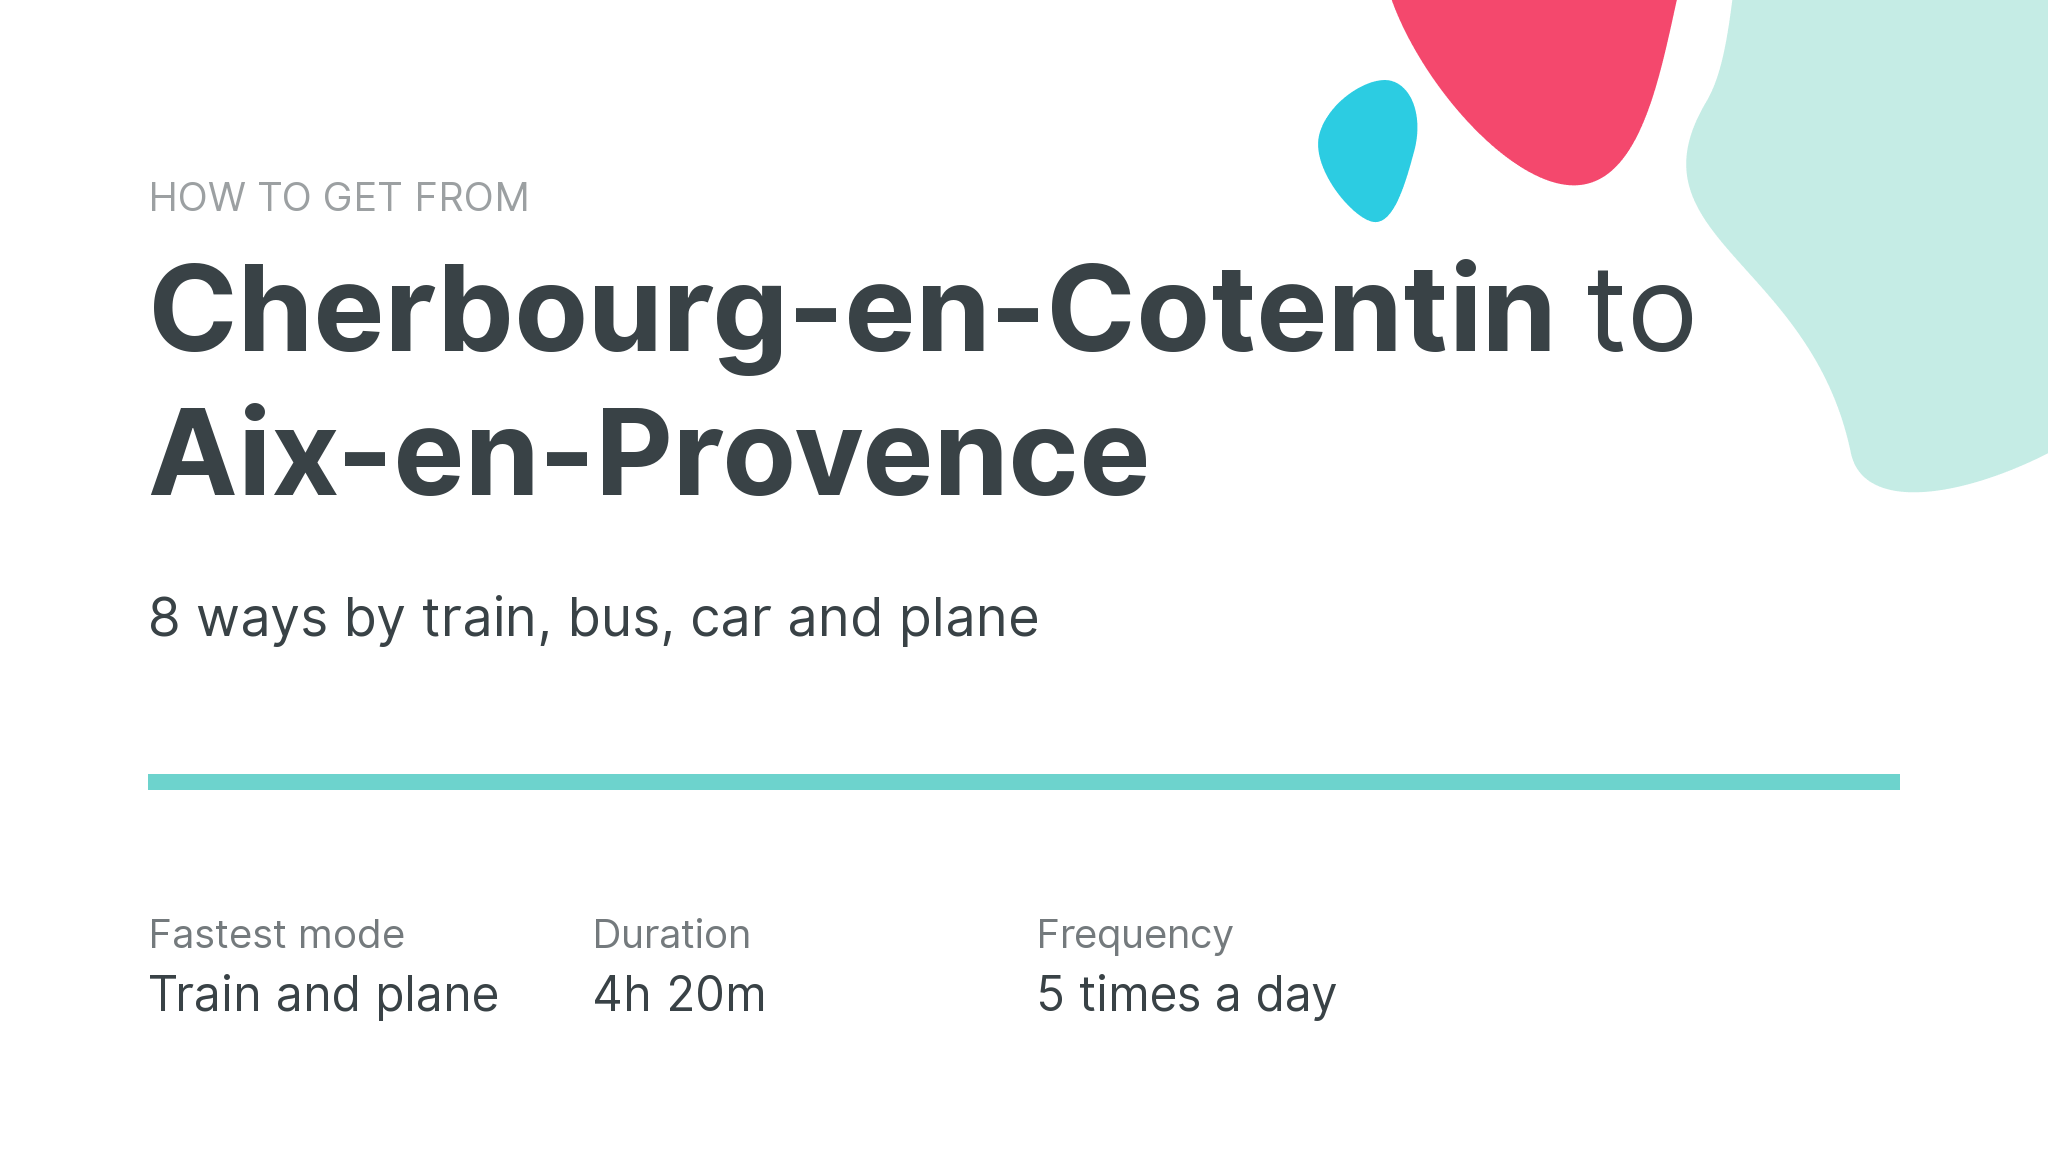 How do I get from Cherbourg-en-Cotentin to Aix-en-Provence